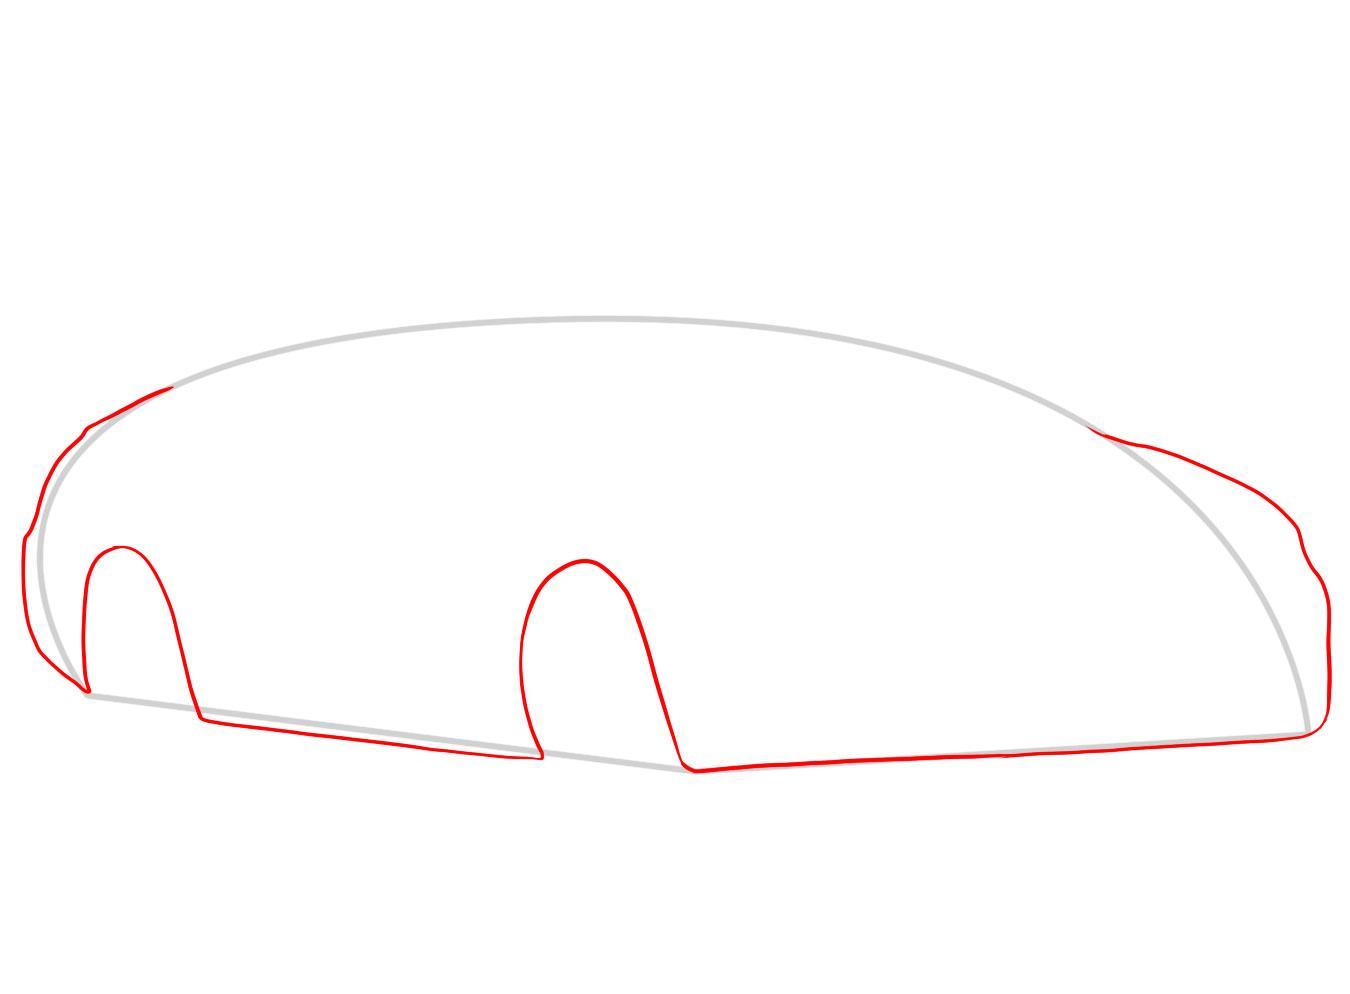 how-to-draw-a-convertible-step-3_1_000000046419_5